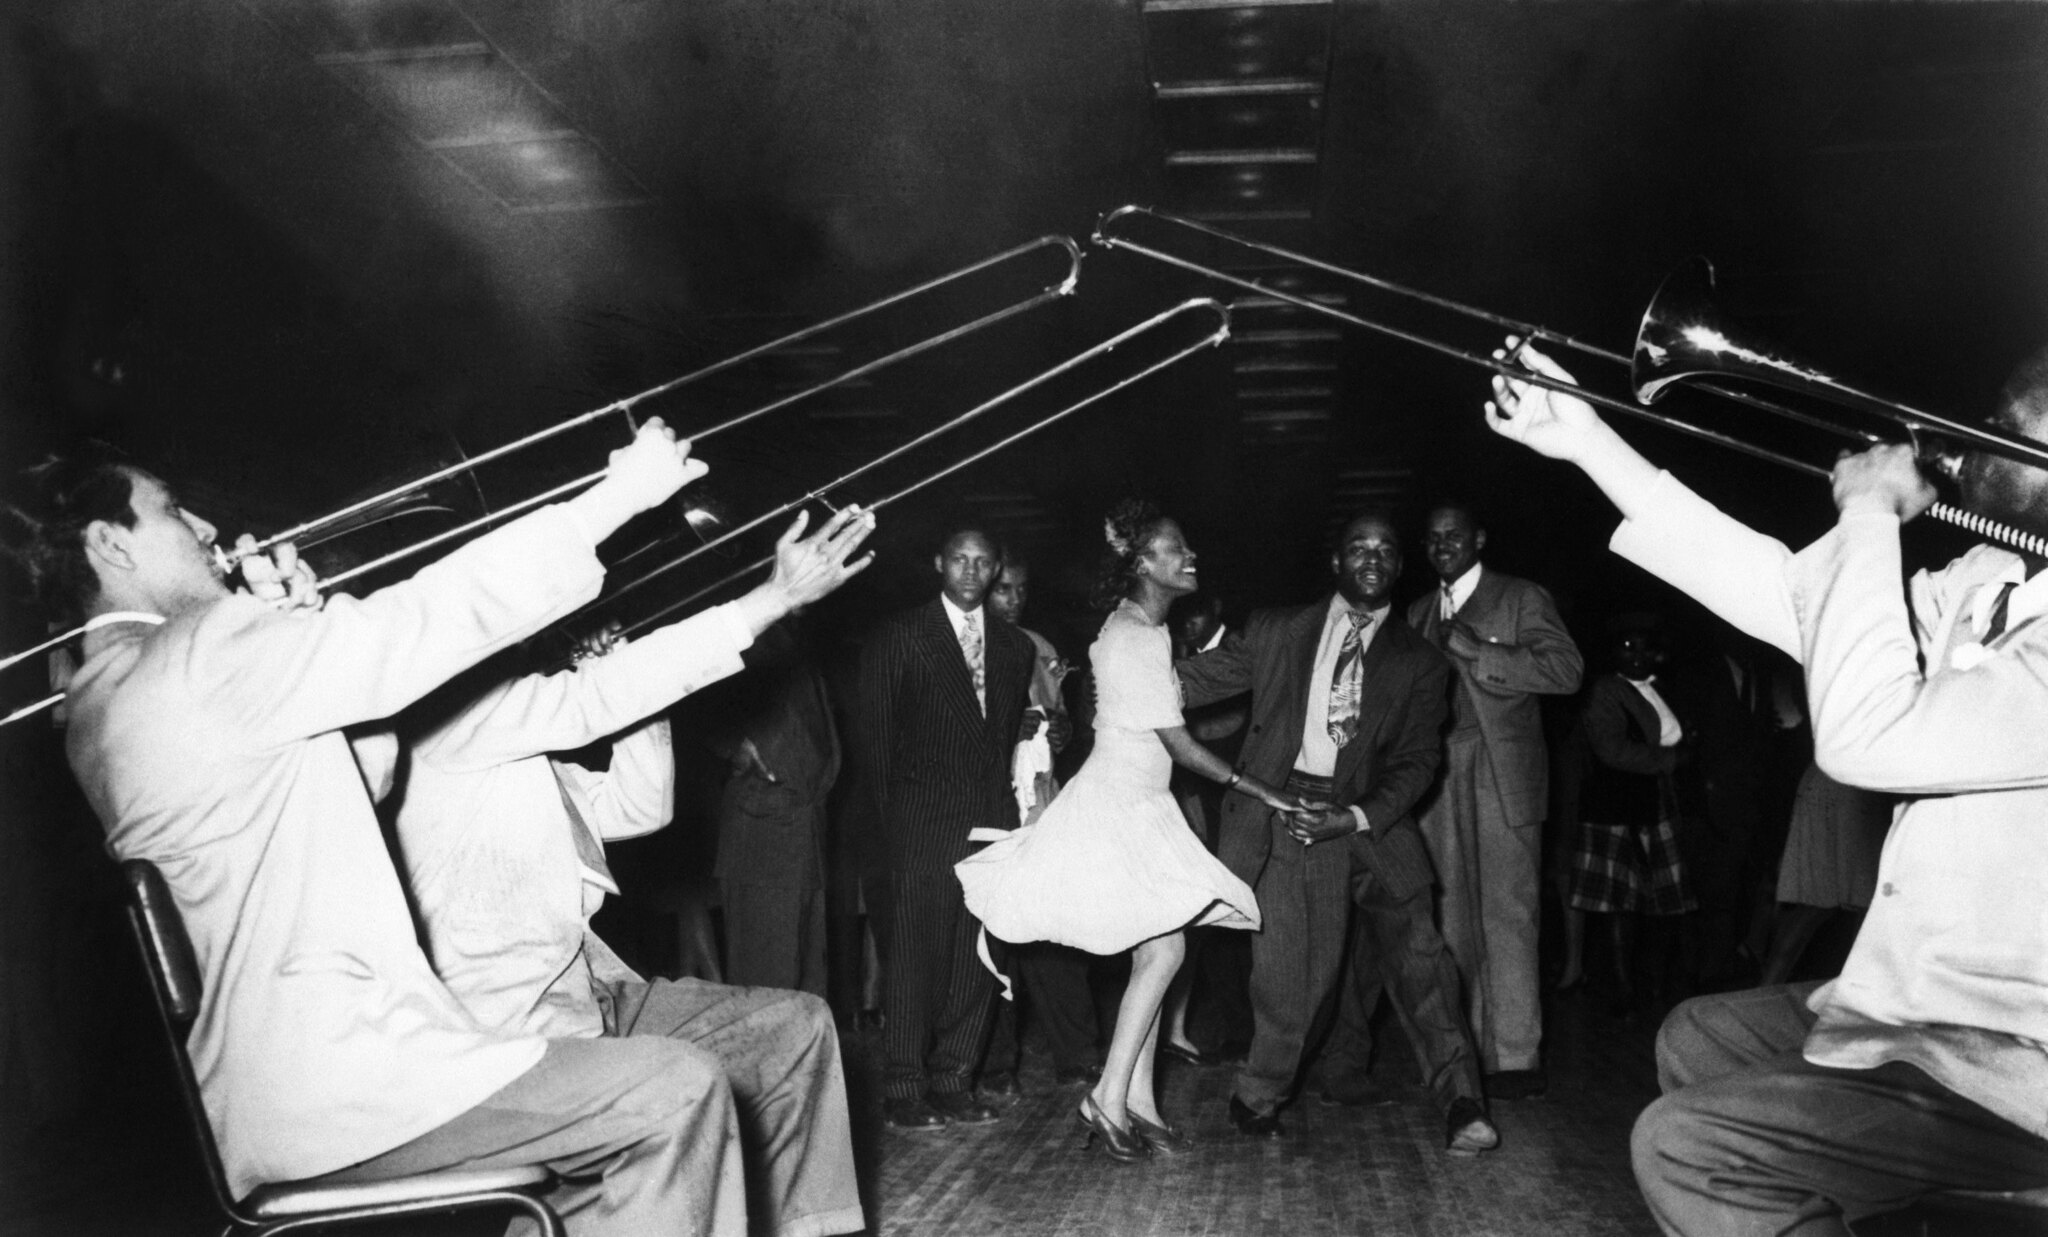 An African-American couple dances in the background to the Swing band playing their trombones in the foreground